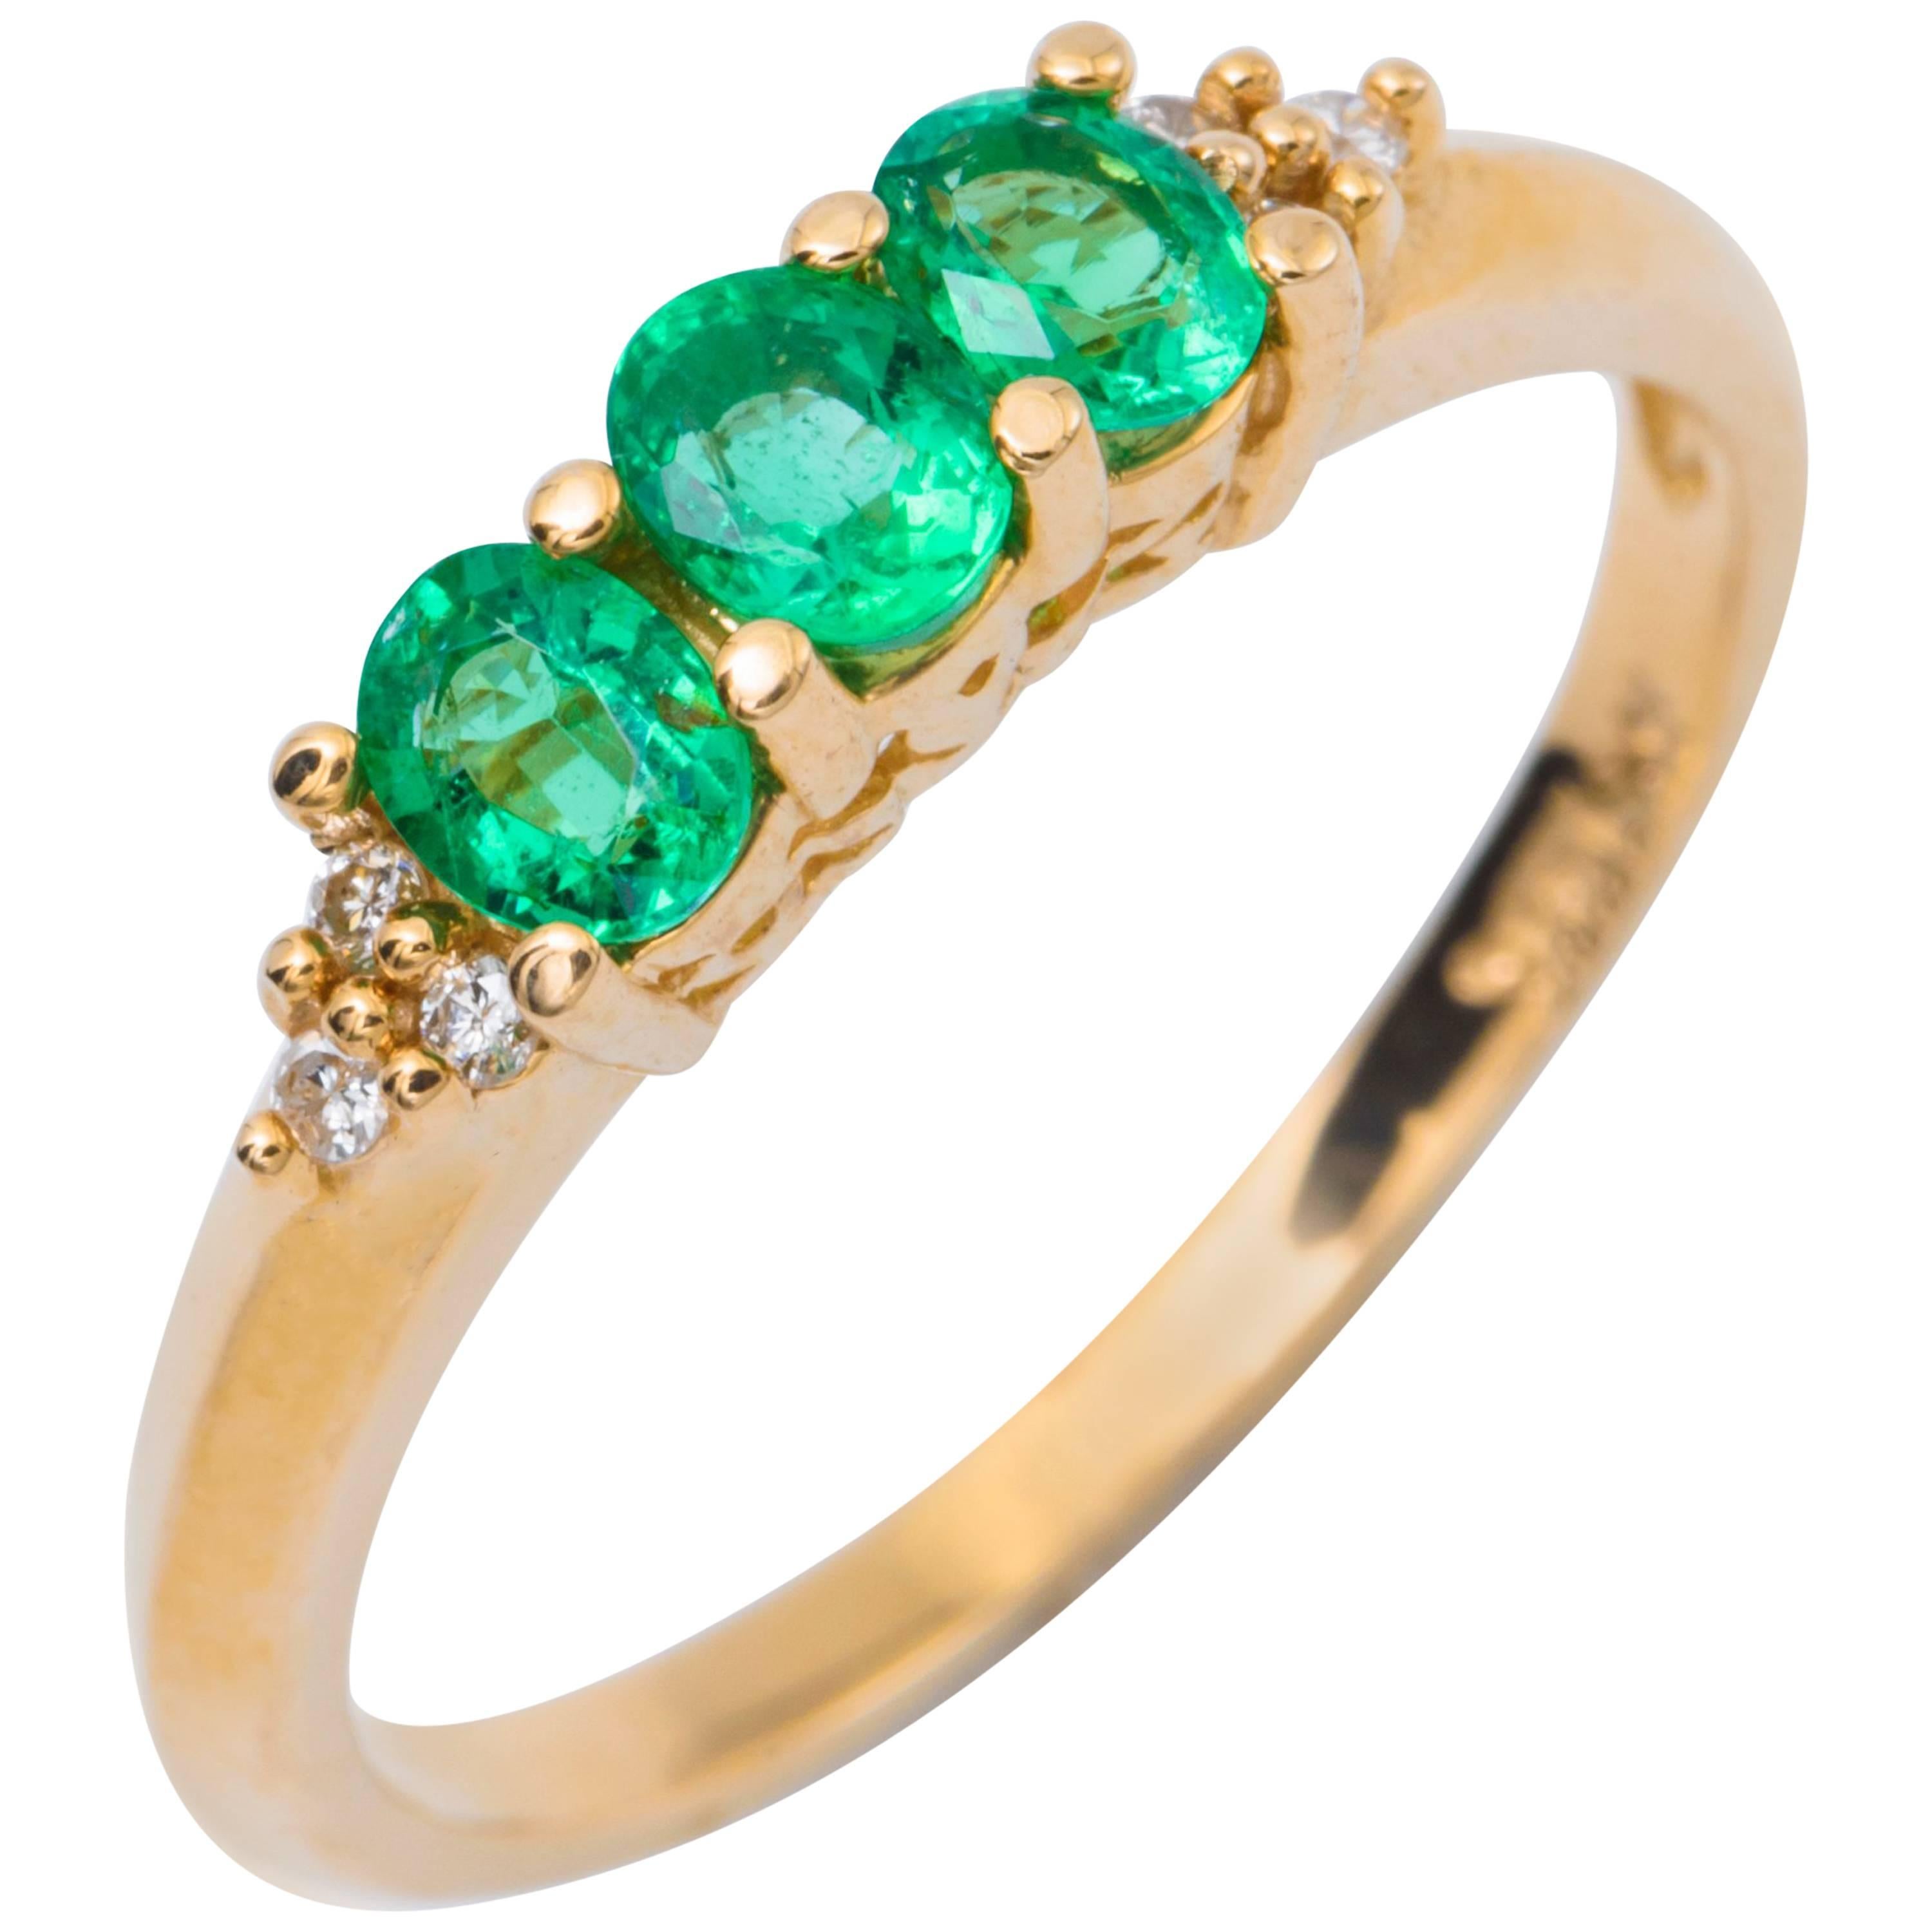 Oval Emerald Tree Stone Ring and Diamond Accent 14 Karat Yellow Gold Band